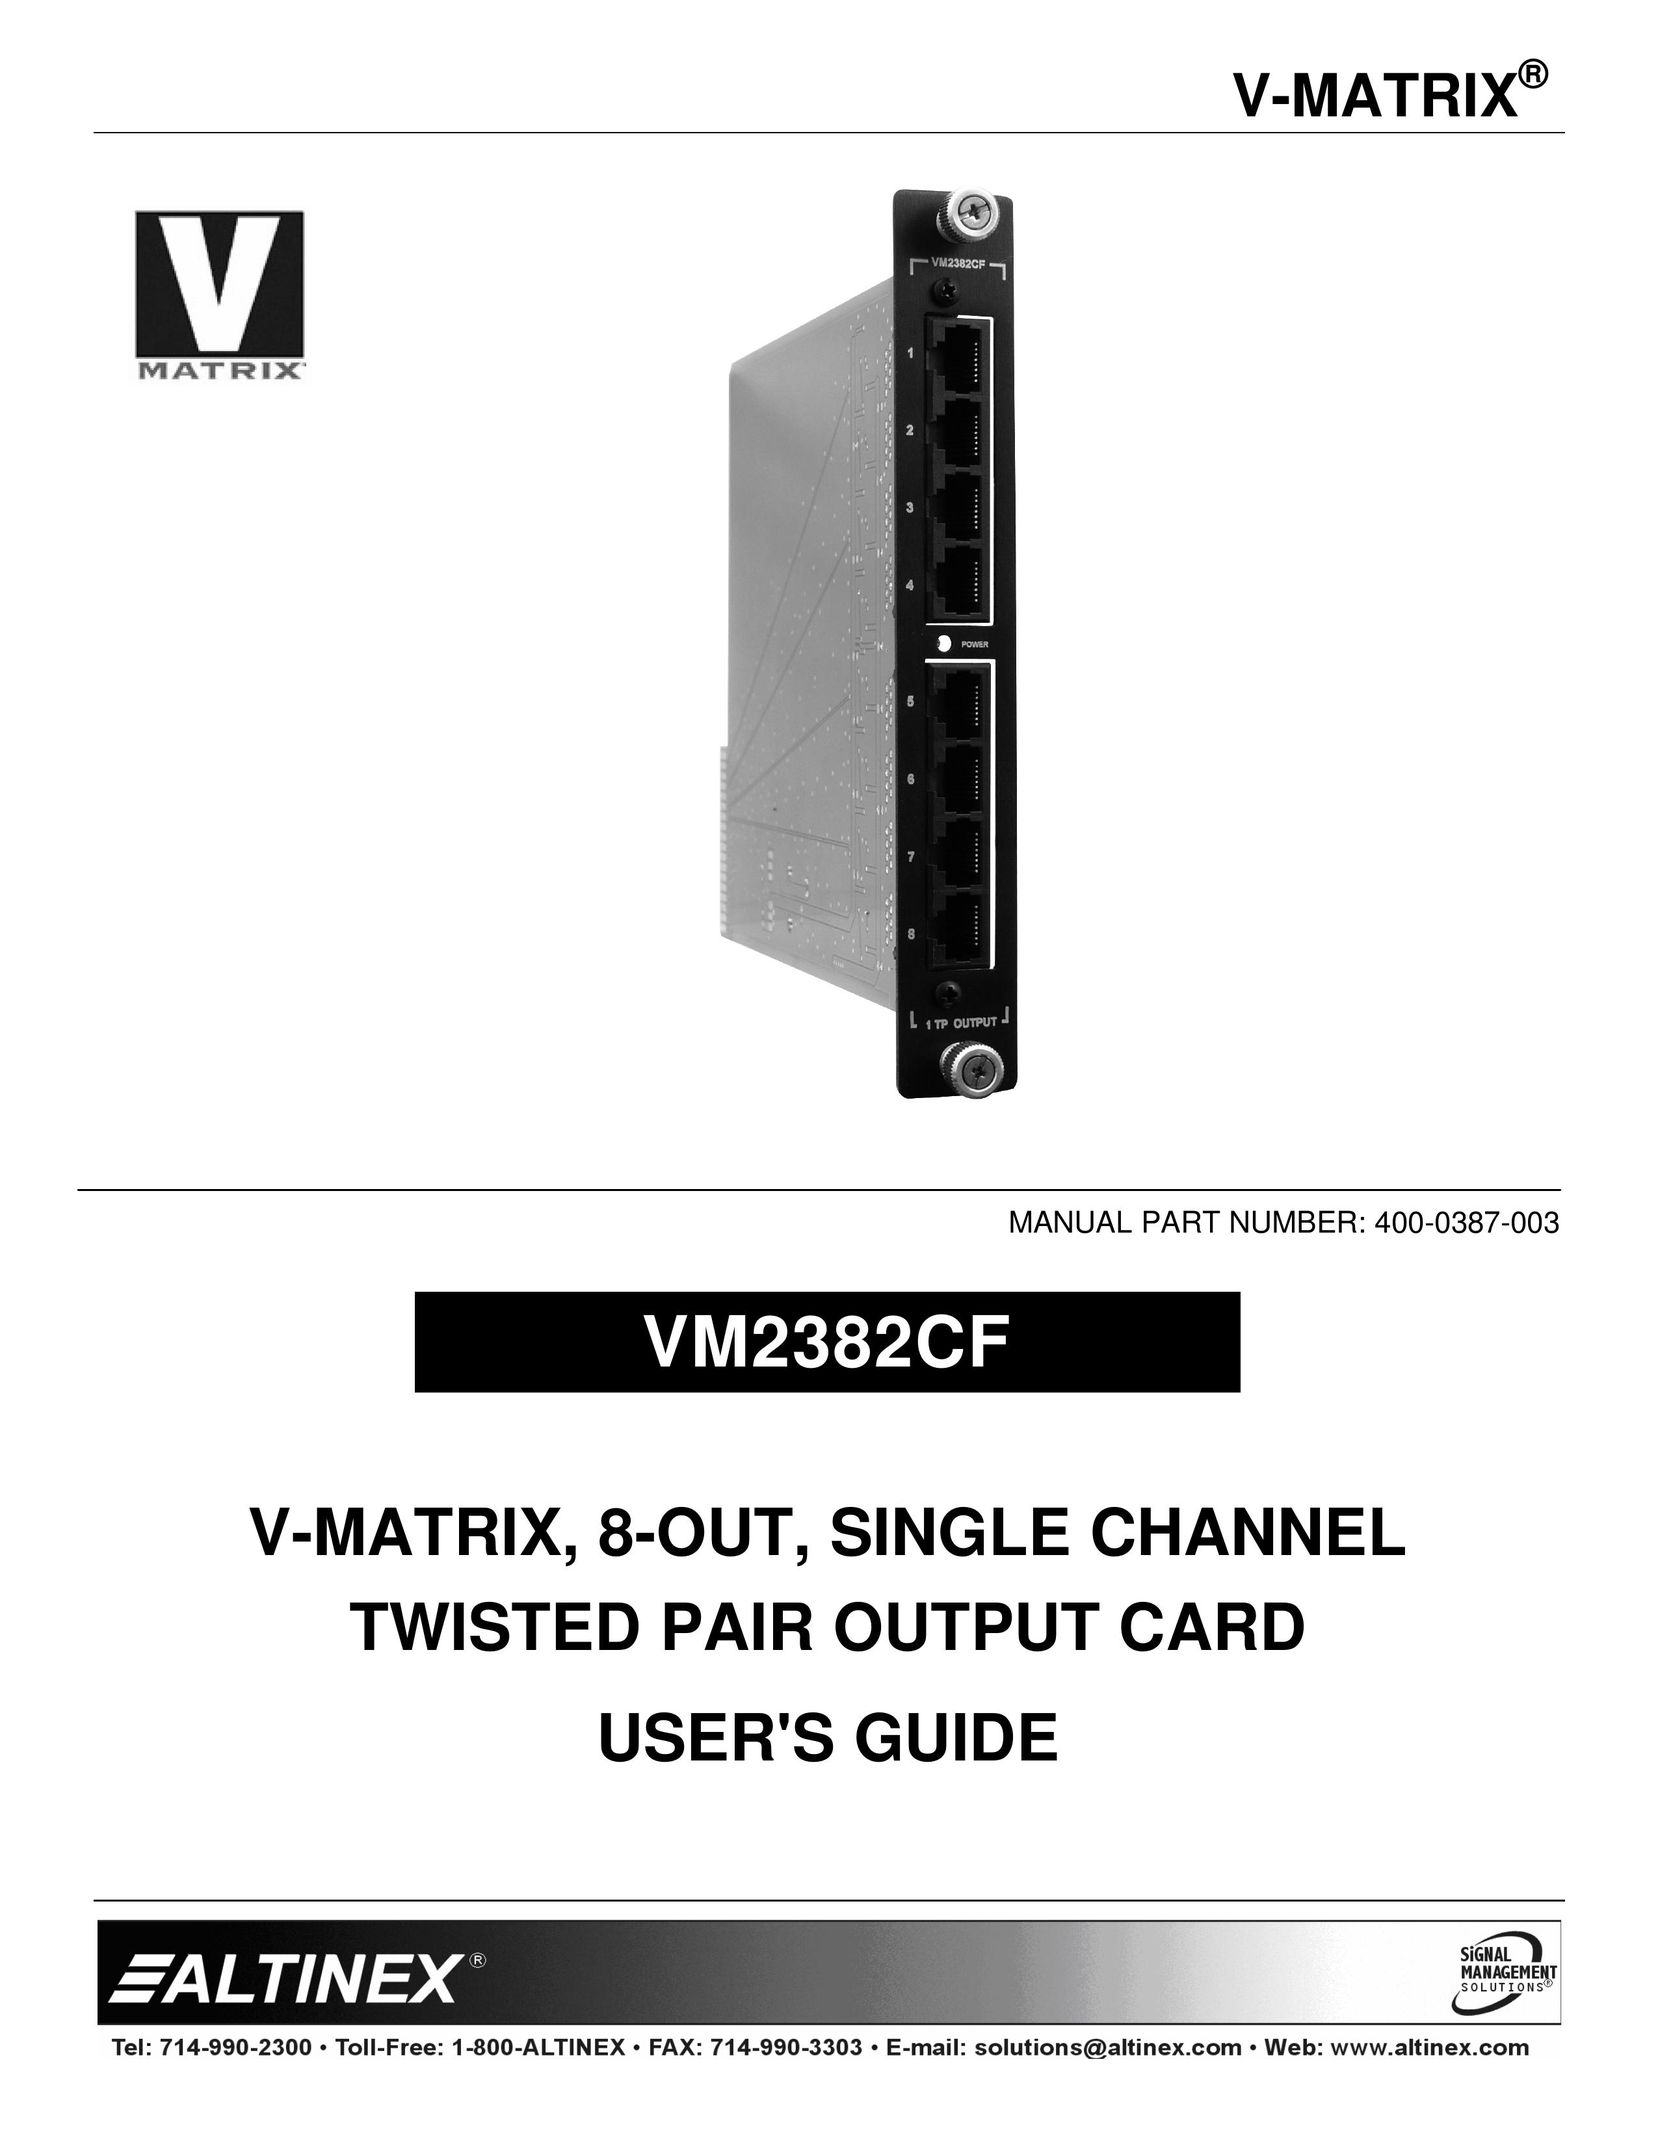 Altinex 400-0387-003 Network Card User Manual (Page 1)